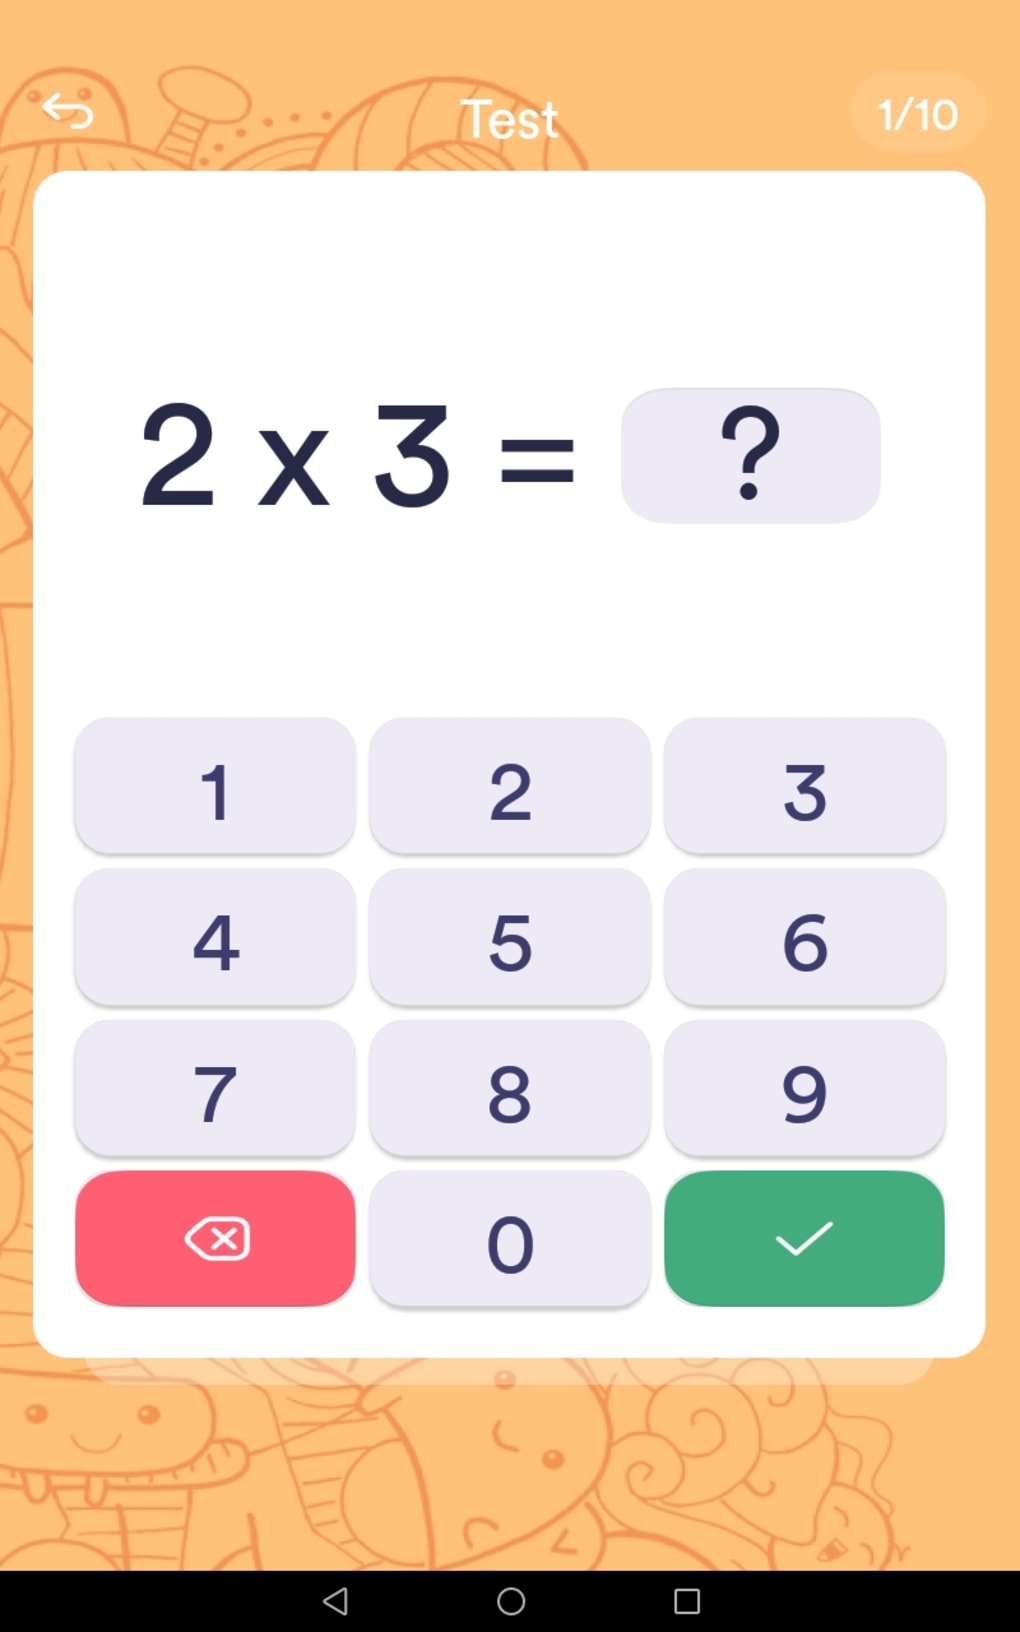 Multiplication and division tables - Koded Apps - Kodular Community